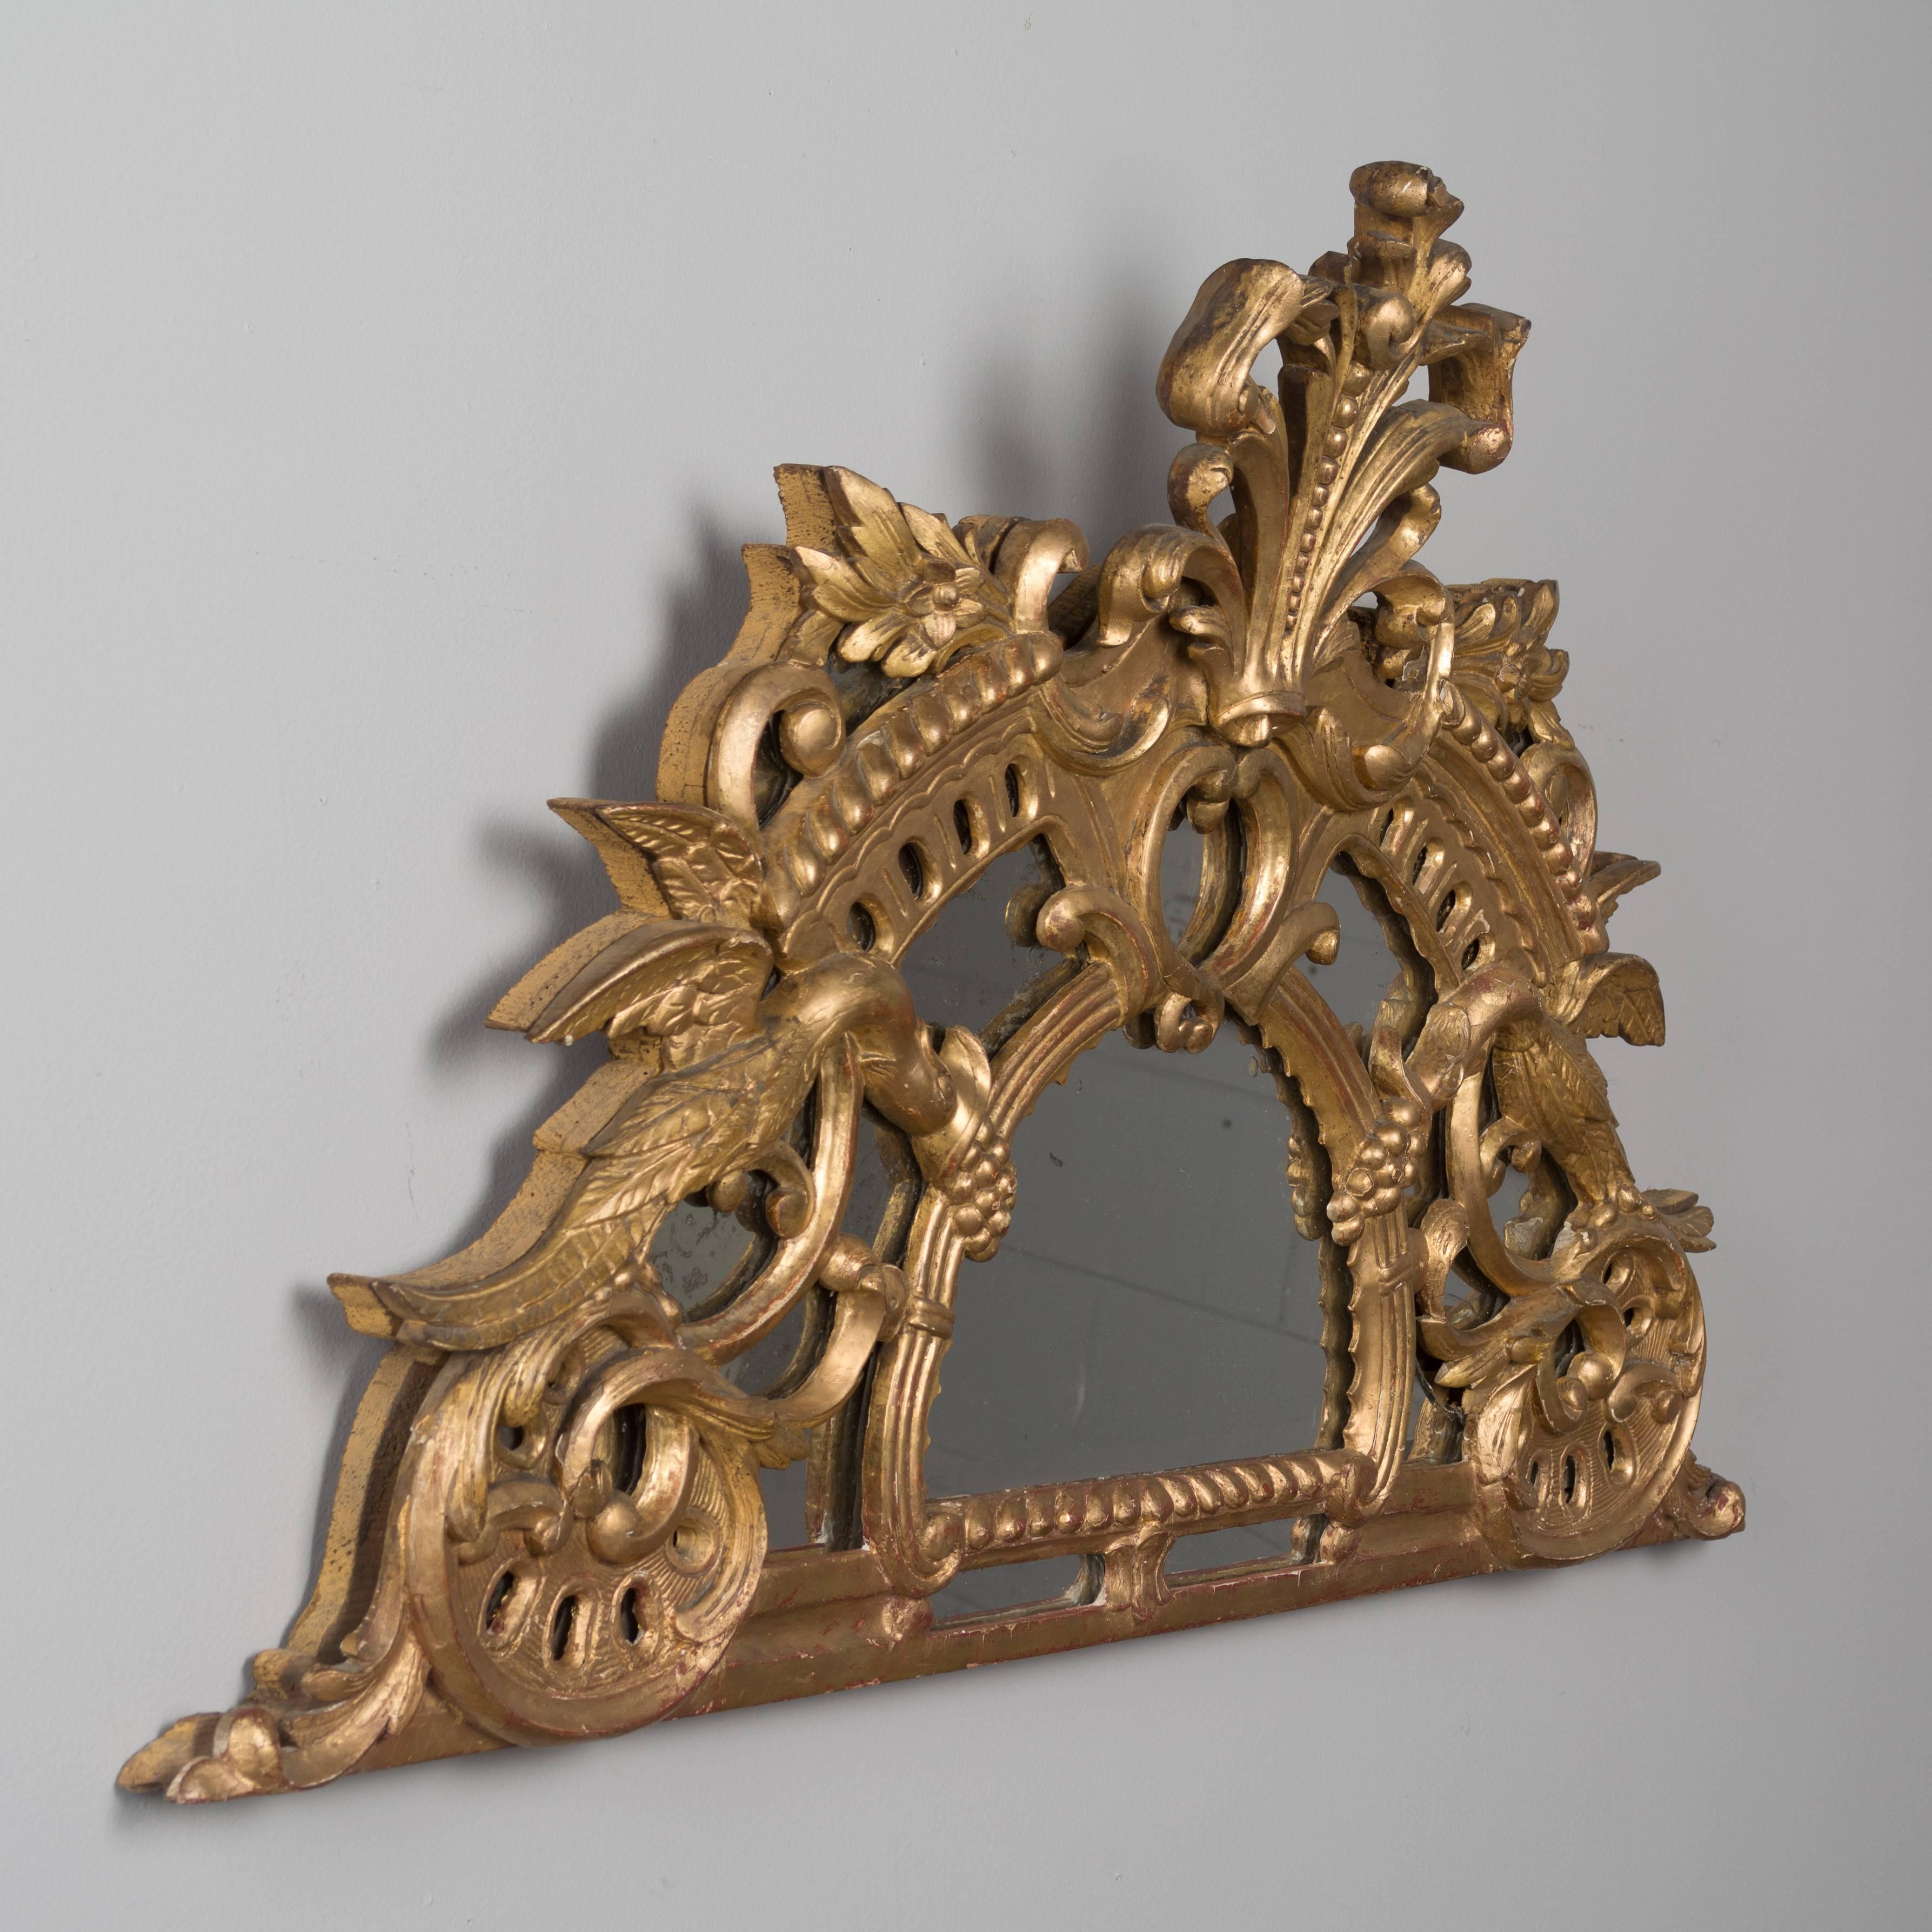 An 18th century French gilt-wood demi-lune mirror. Hand-carved decoration with phoenix flanking each side, acanthus leaves and a tall crest. Original mirror with old silvering. Bright gilt has been touched up but is in very good condition for the